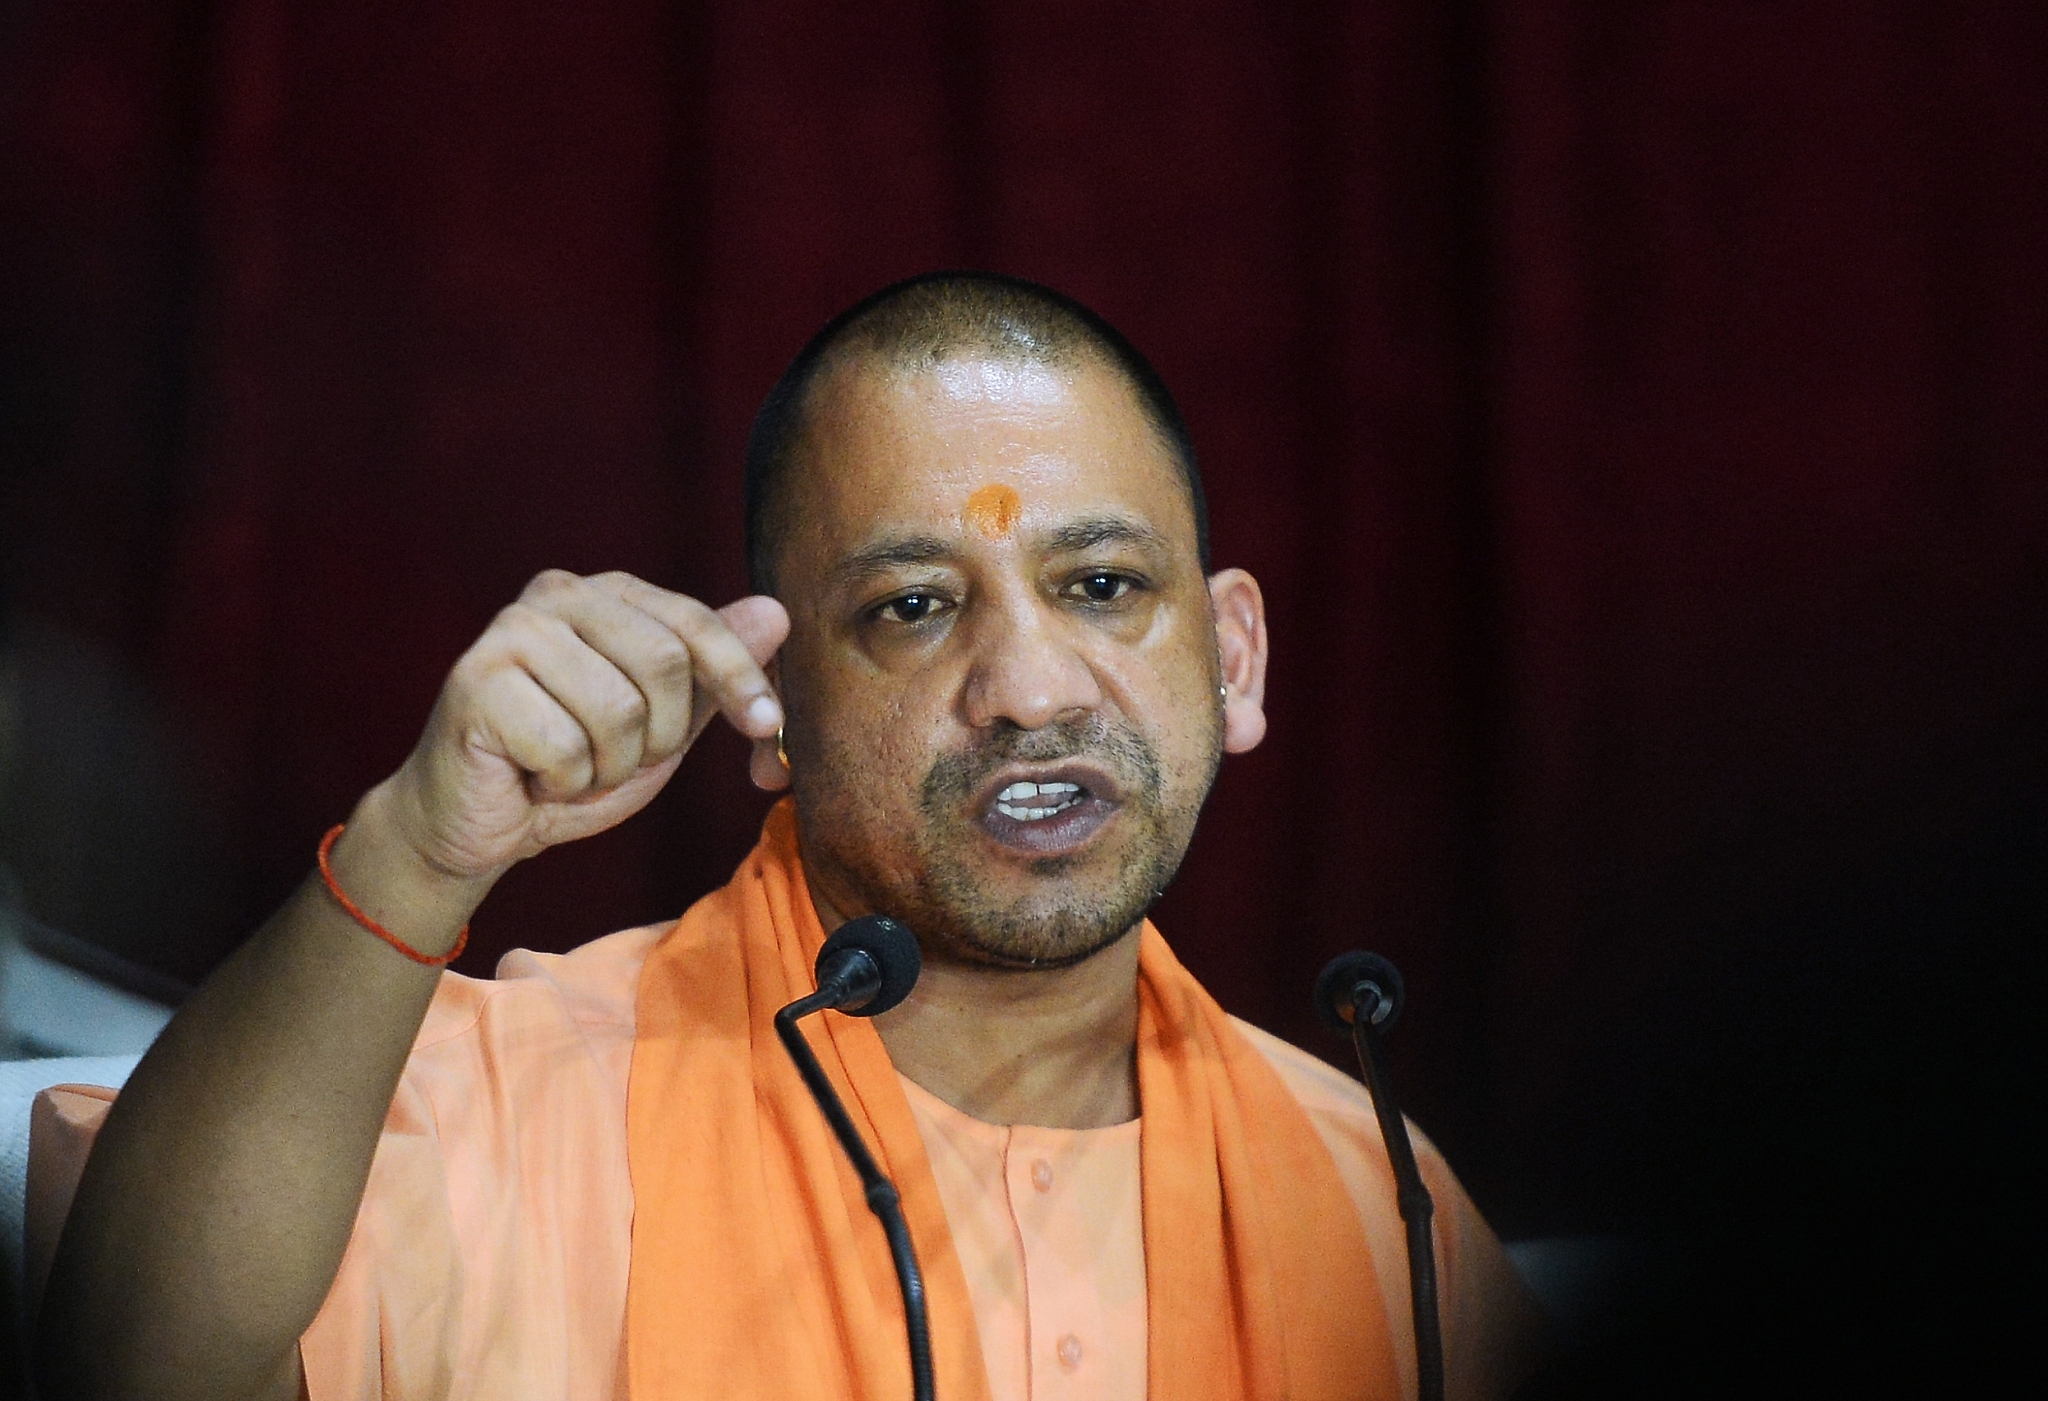 Chief Minister of Uttar Pradesh (UP), Yogi Adityanath gestures during a press confrence after visiting the Baba Raghav Das Hospital in Gorakhpur. (SANJAY KANOJIA/AFP/Getty Images)